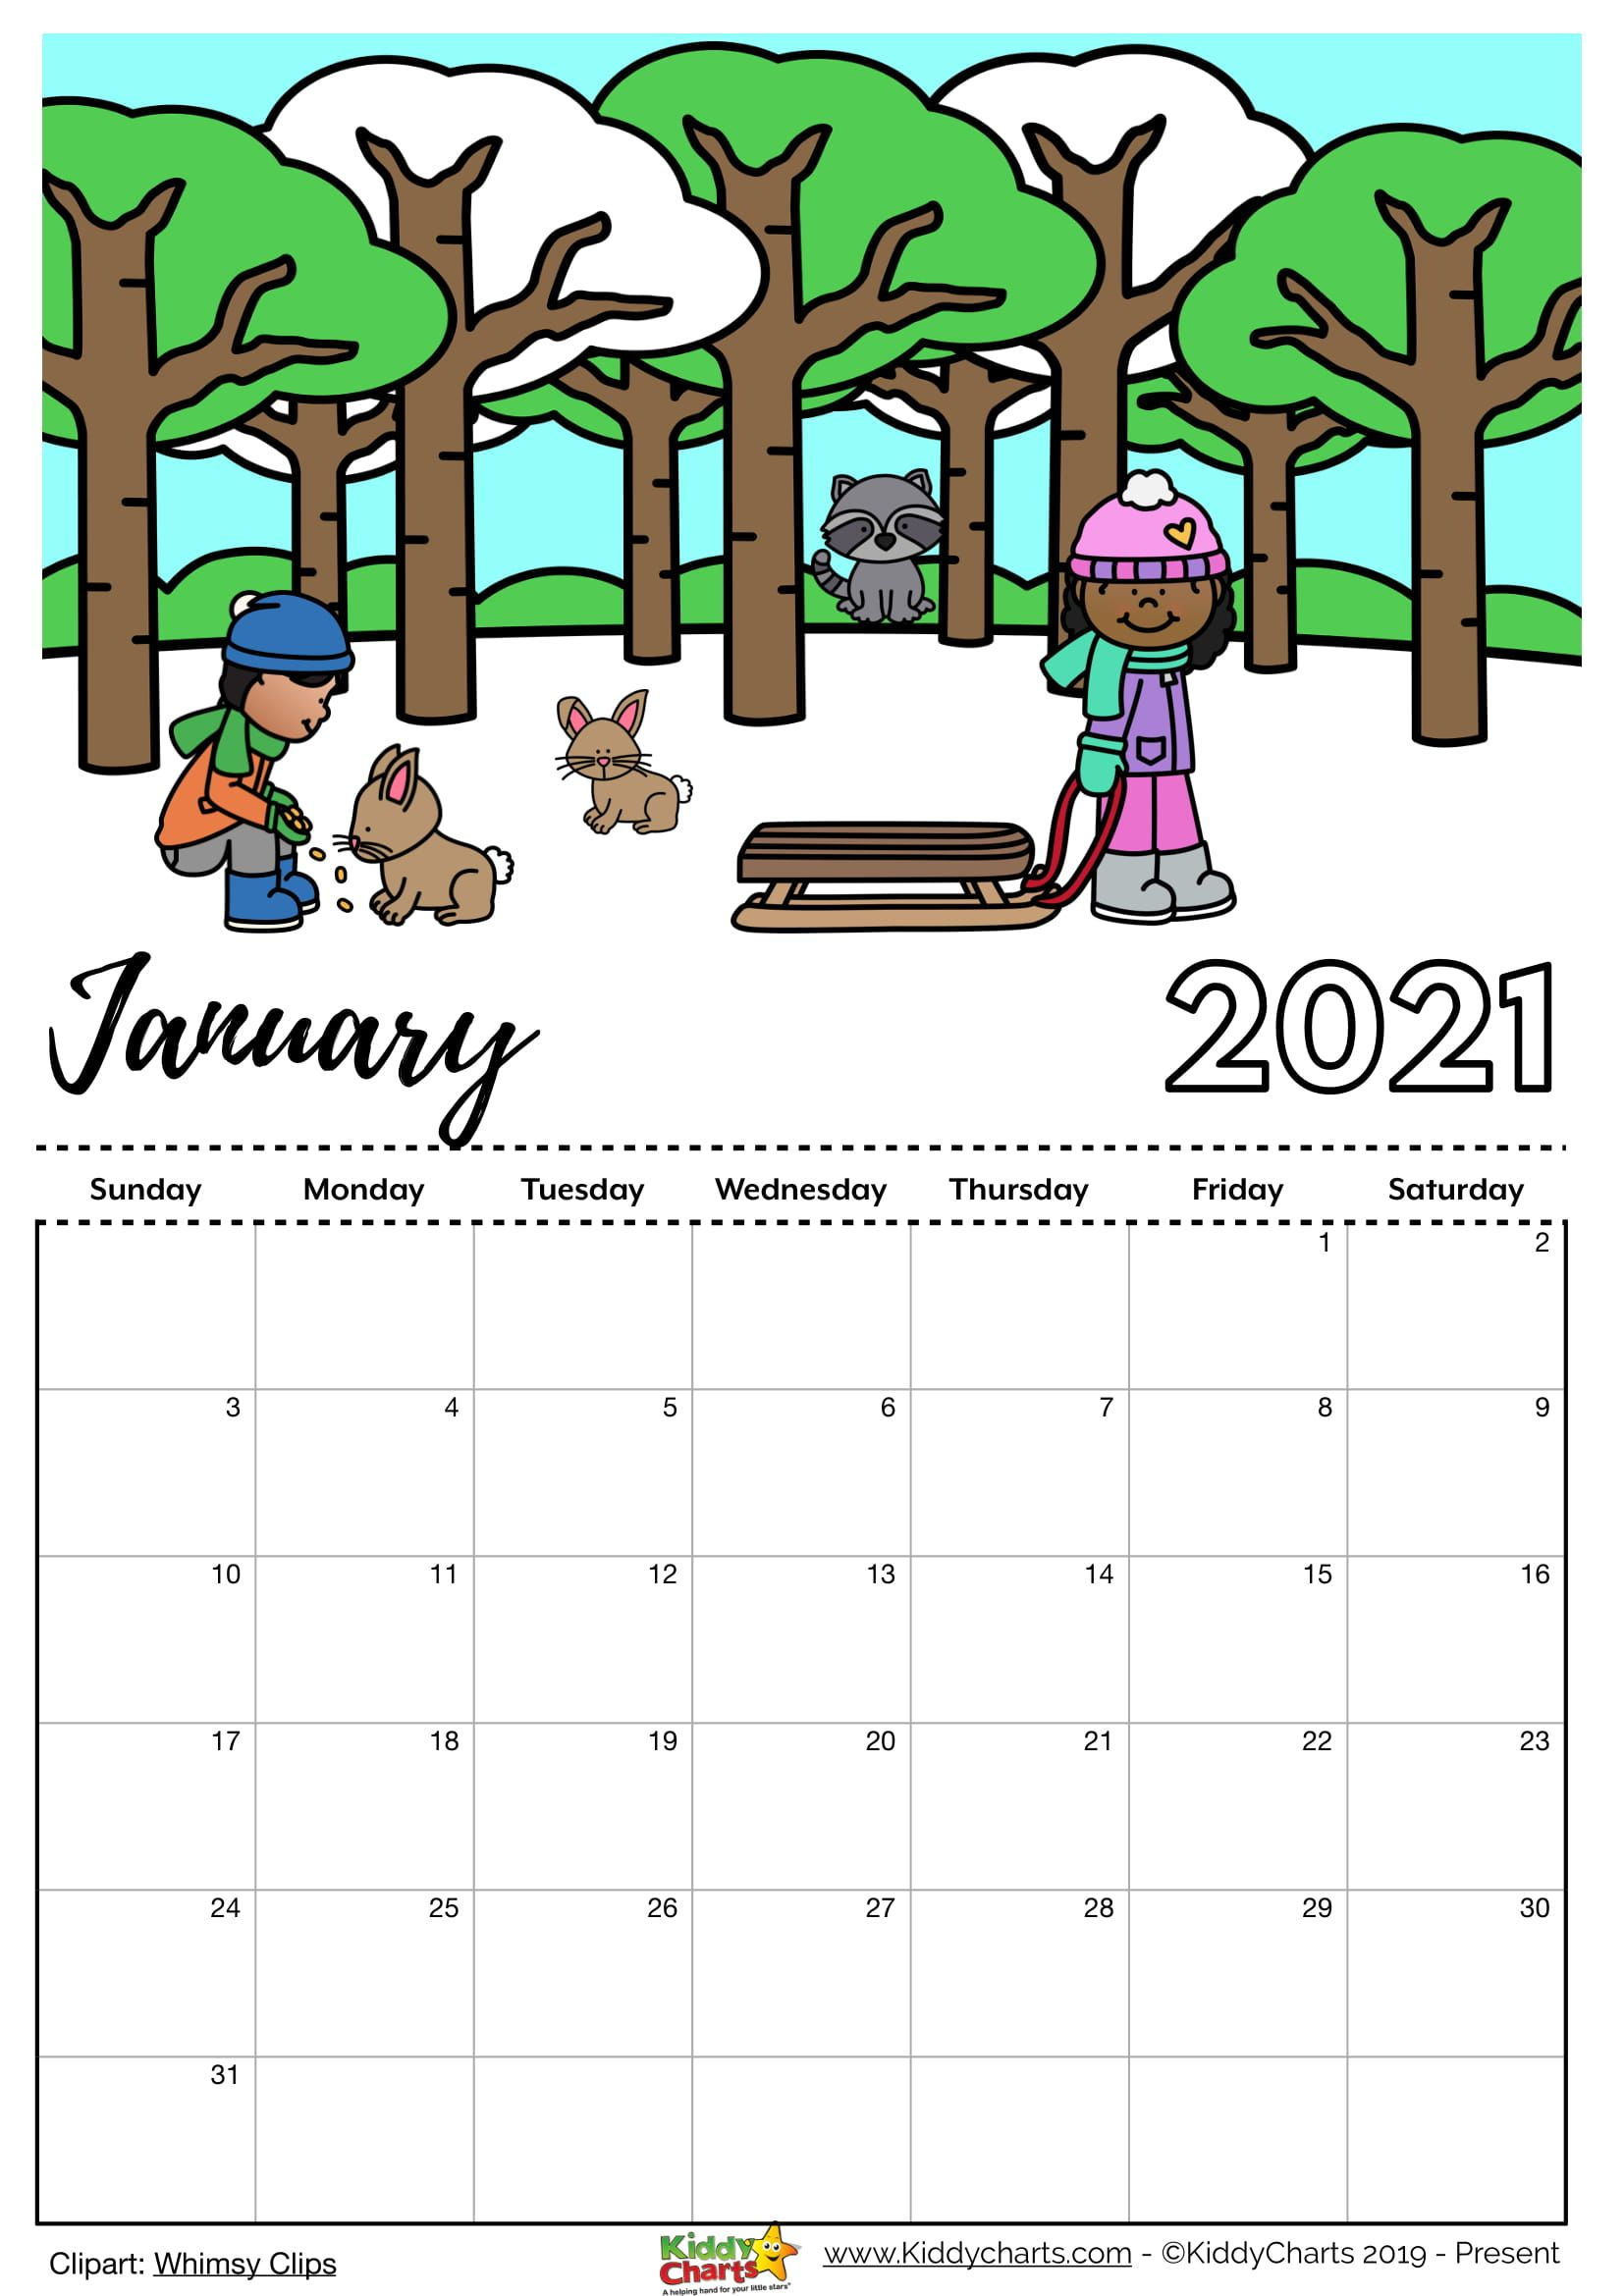 Check Our New Free Printable 2021 Calendar! In 2020